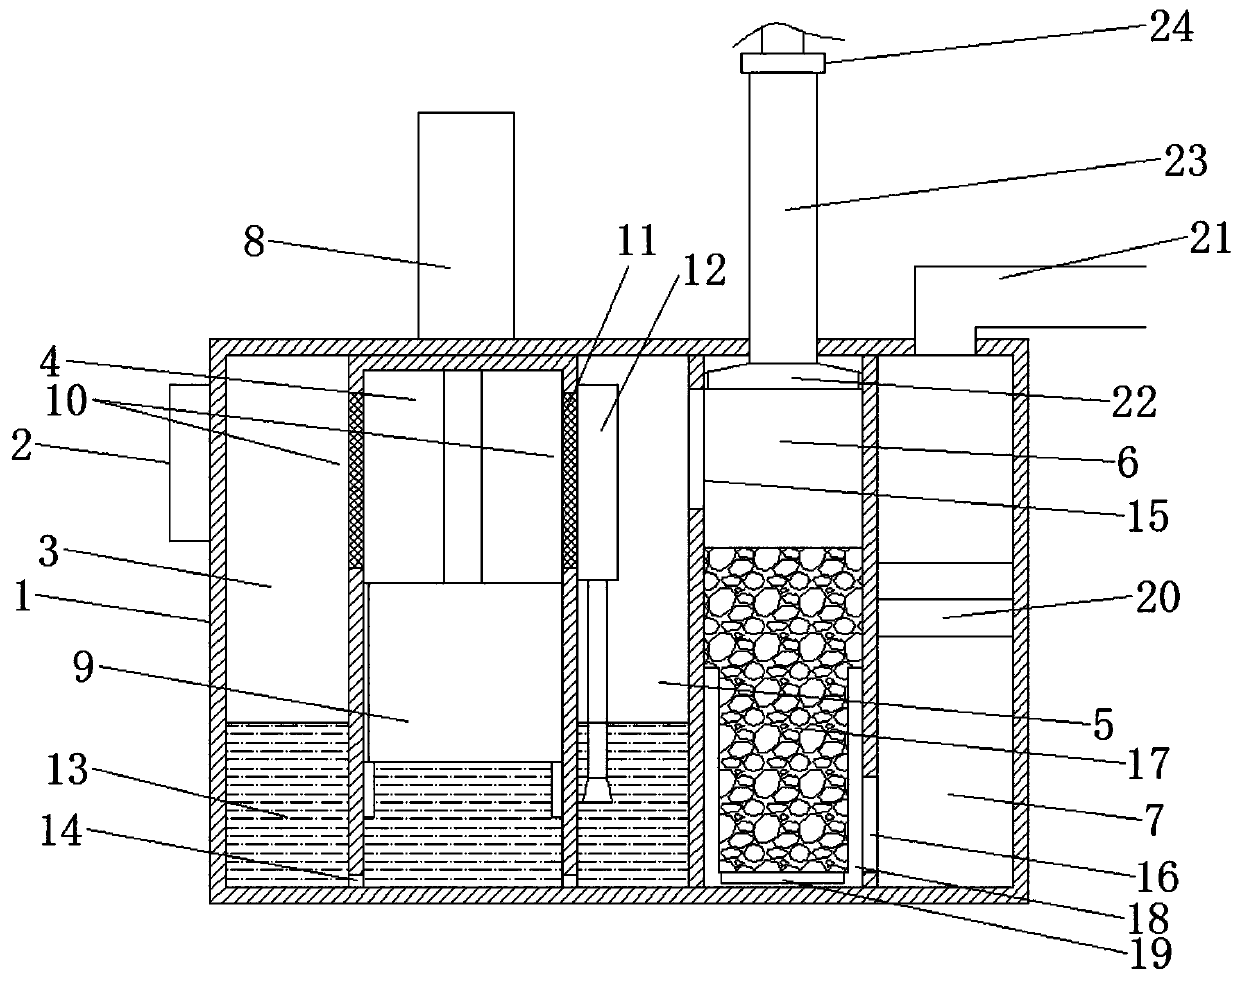 Filtering device for air purification equipment